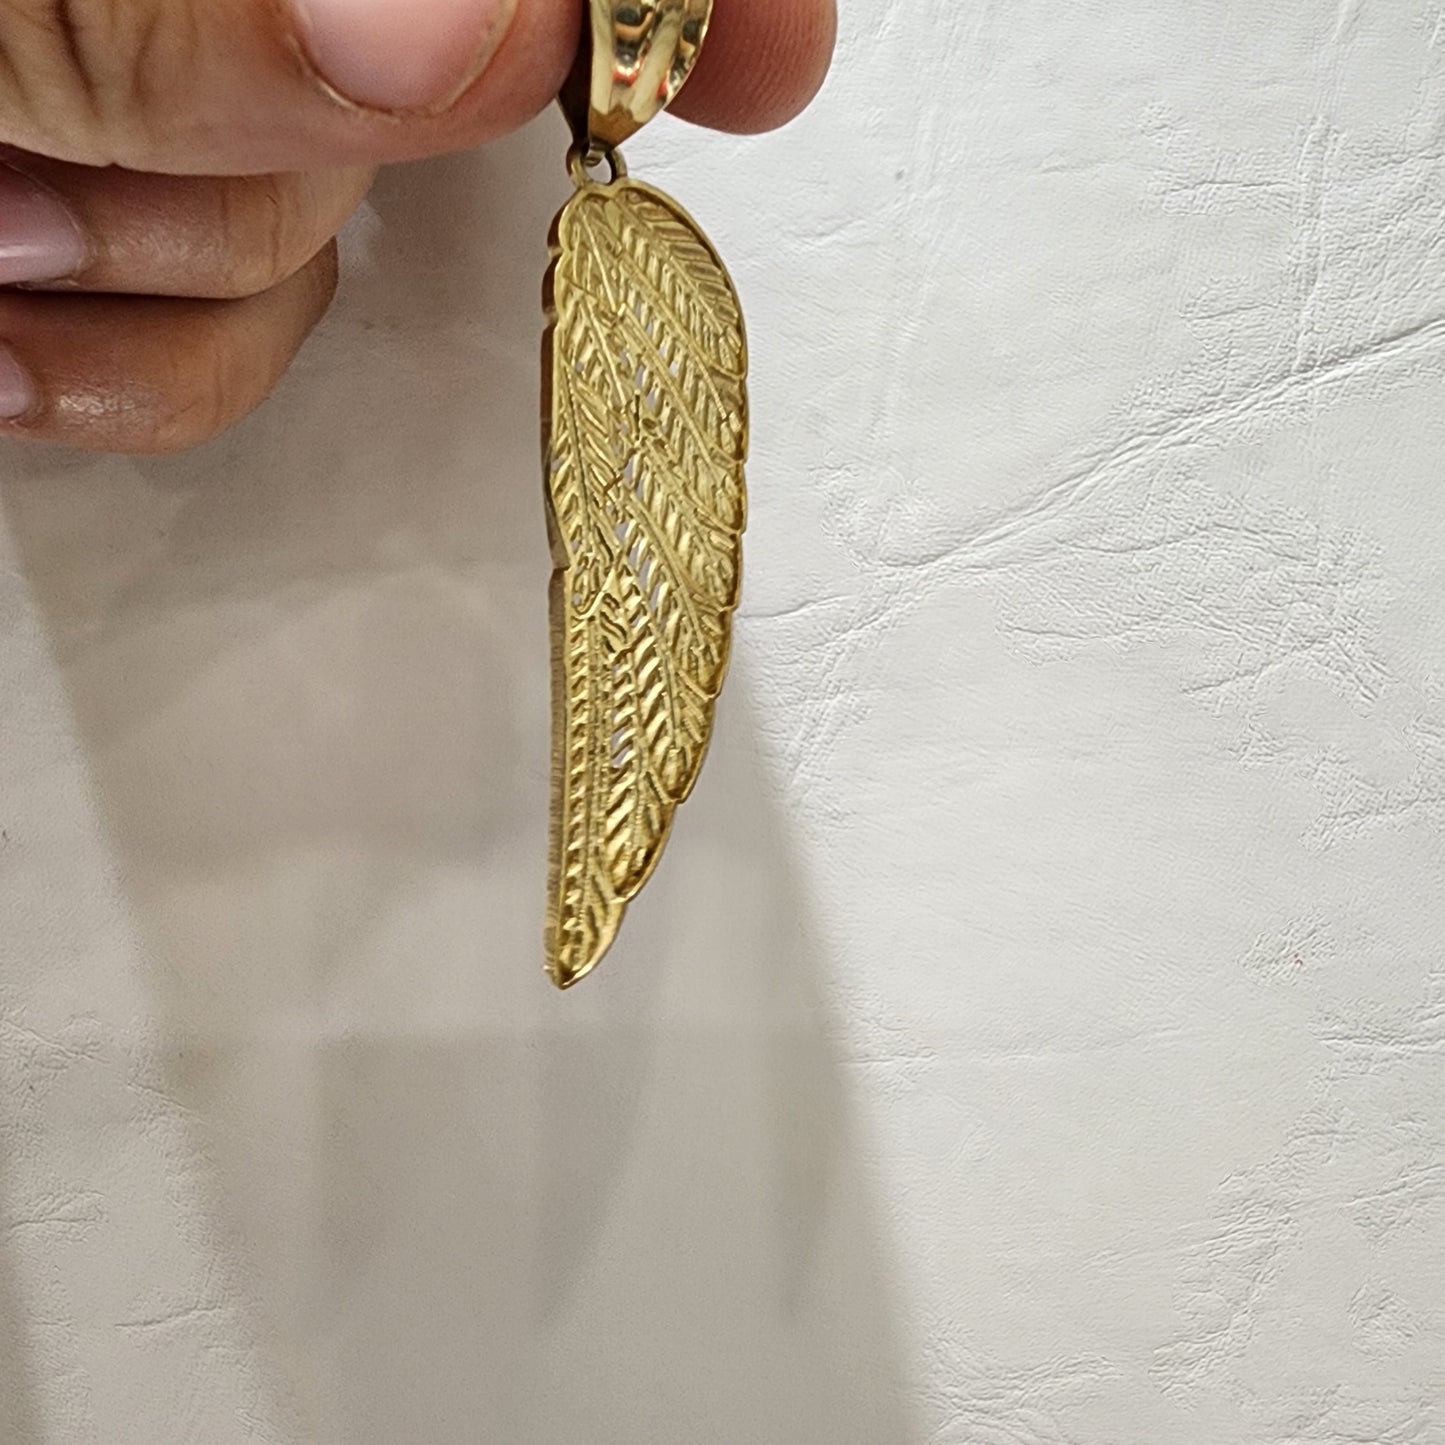 10K Gold Angel Feather Pendant